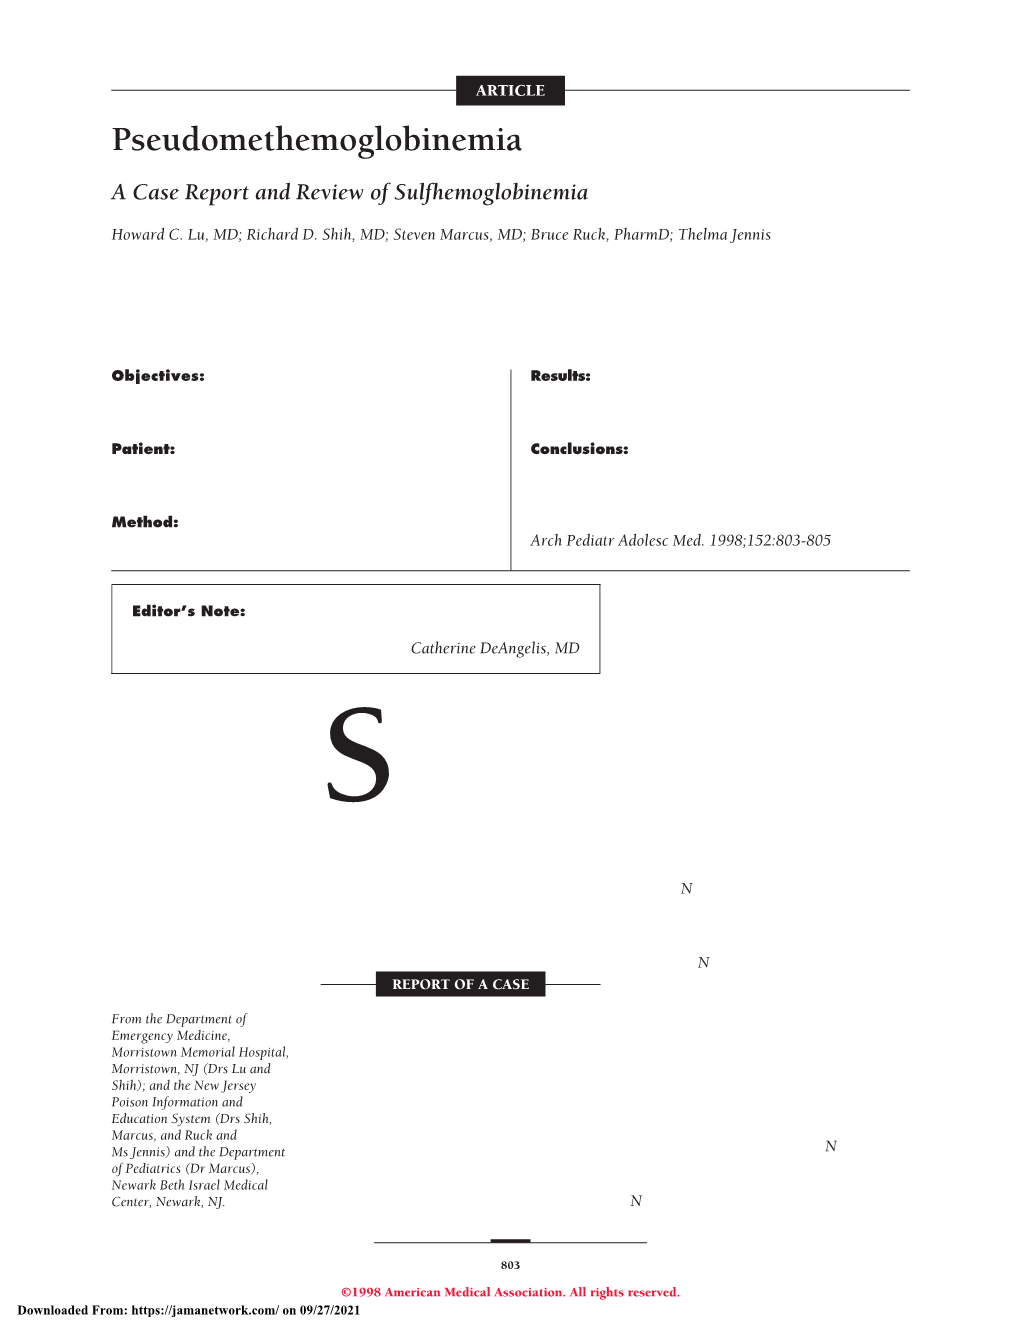 A Case Report and Review of Sulfhemoglobinemia